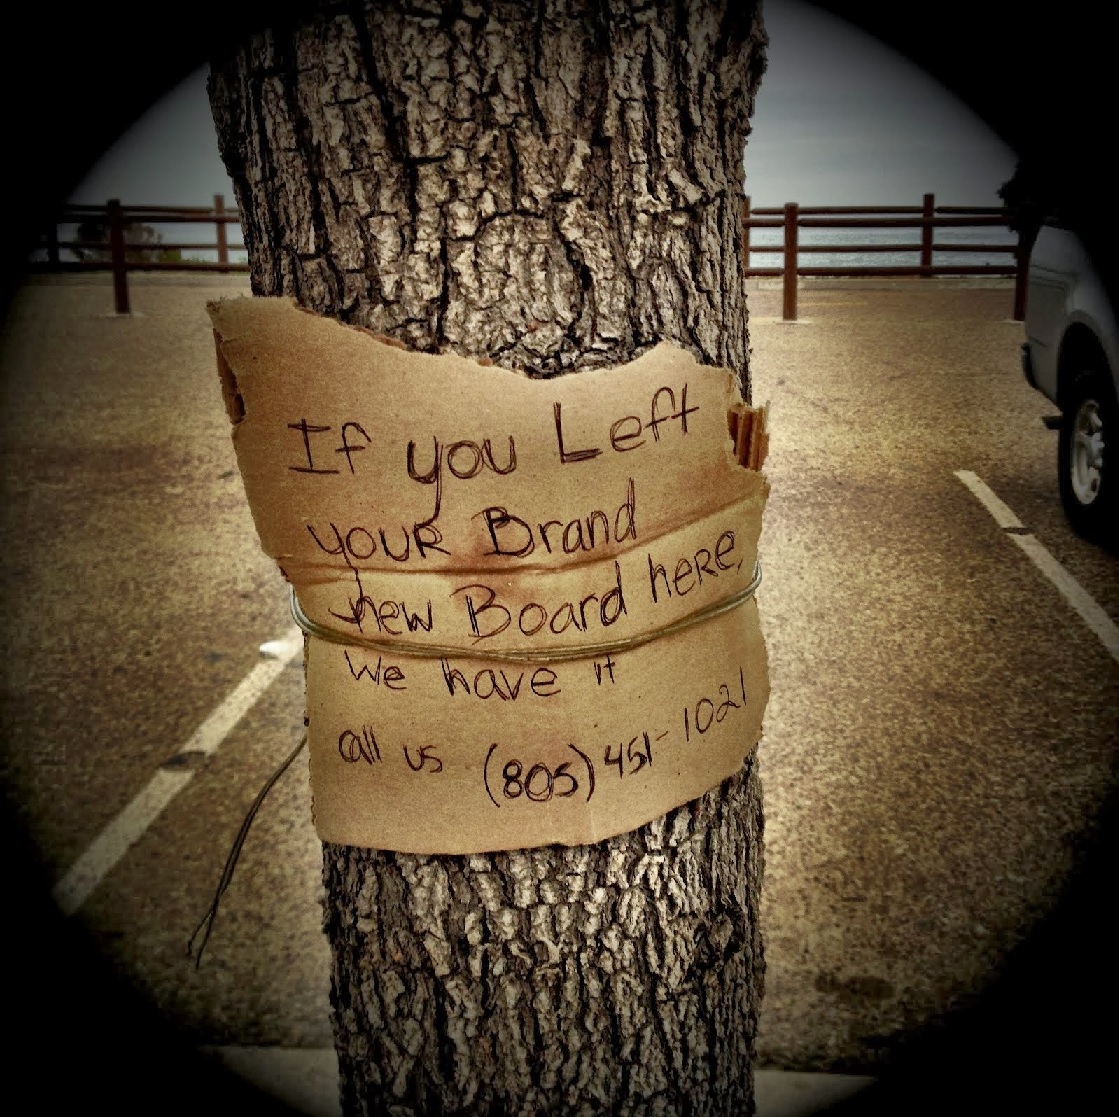 When some kids left this note to track down the owner of a forgotten skateboard that they could’ve easily stolen.